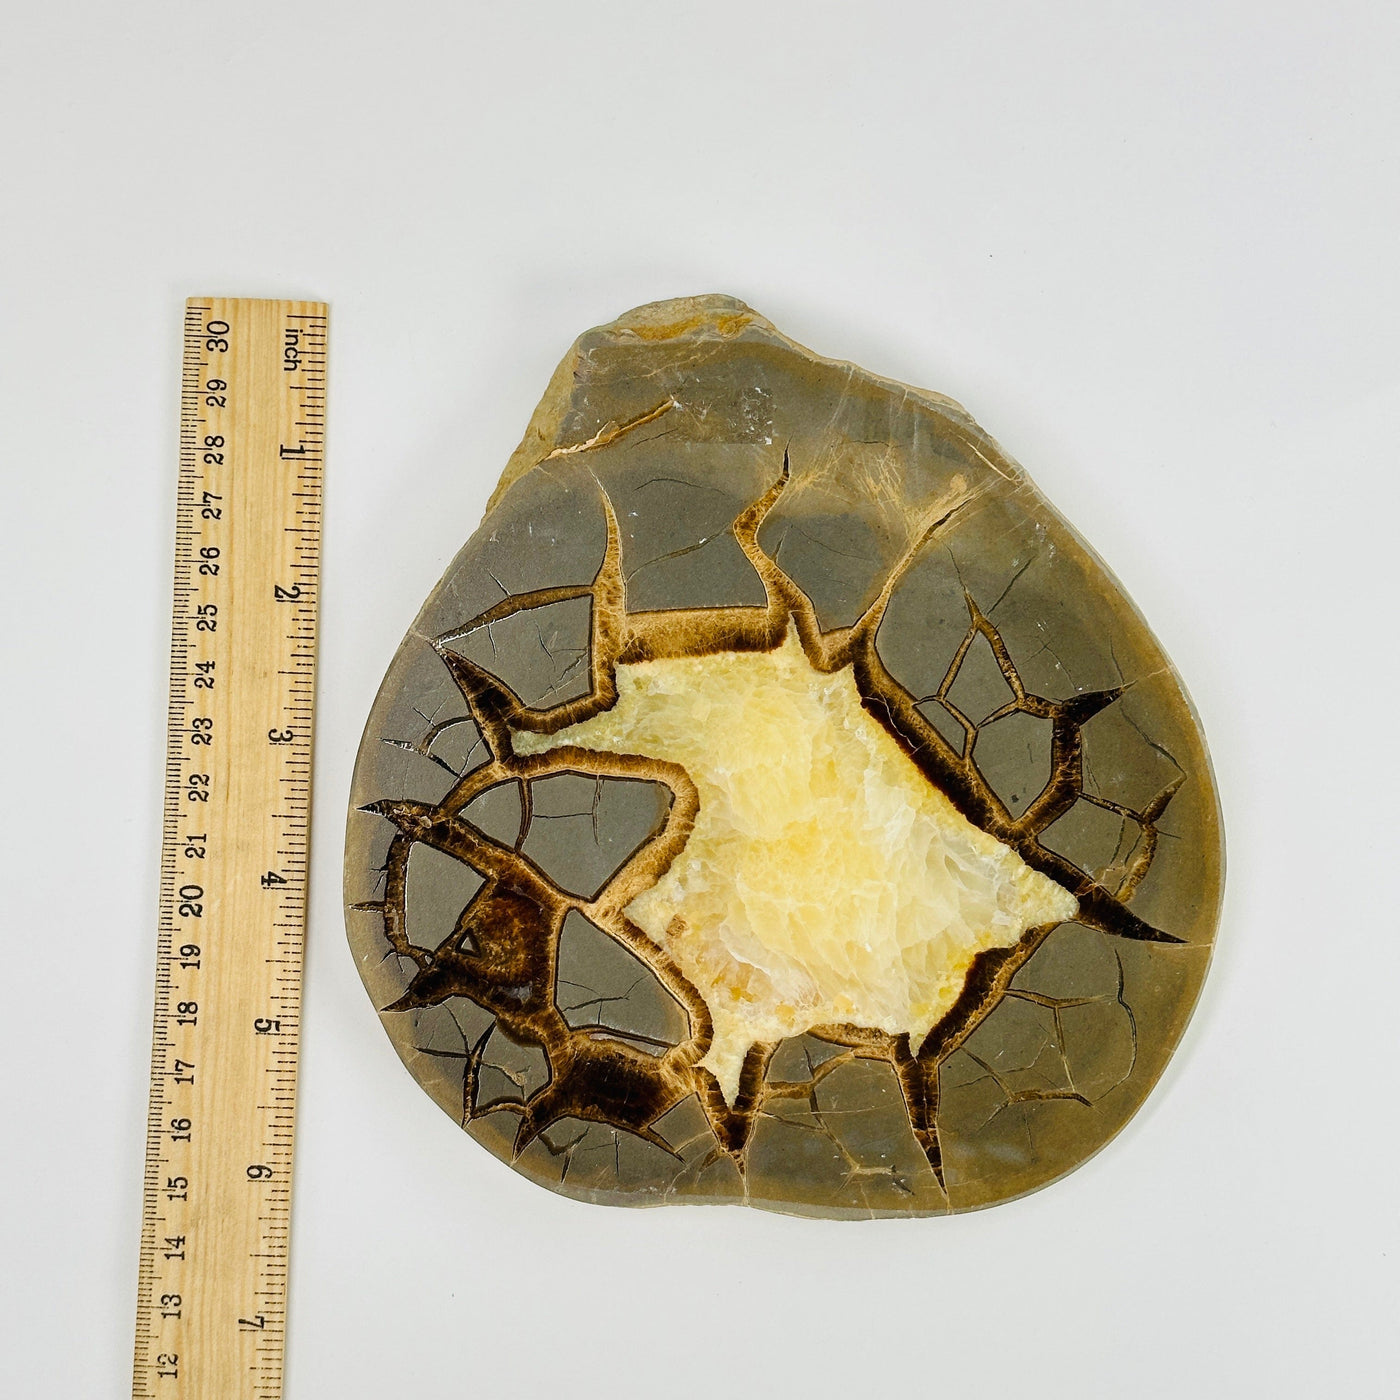 septarian slab next to a ruler for size reference